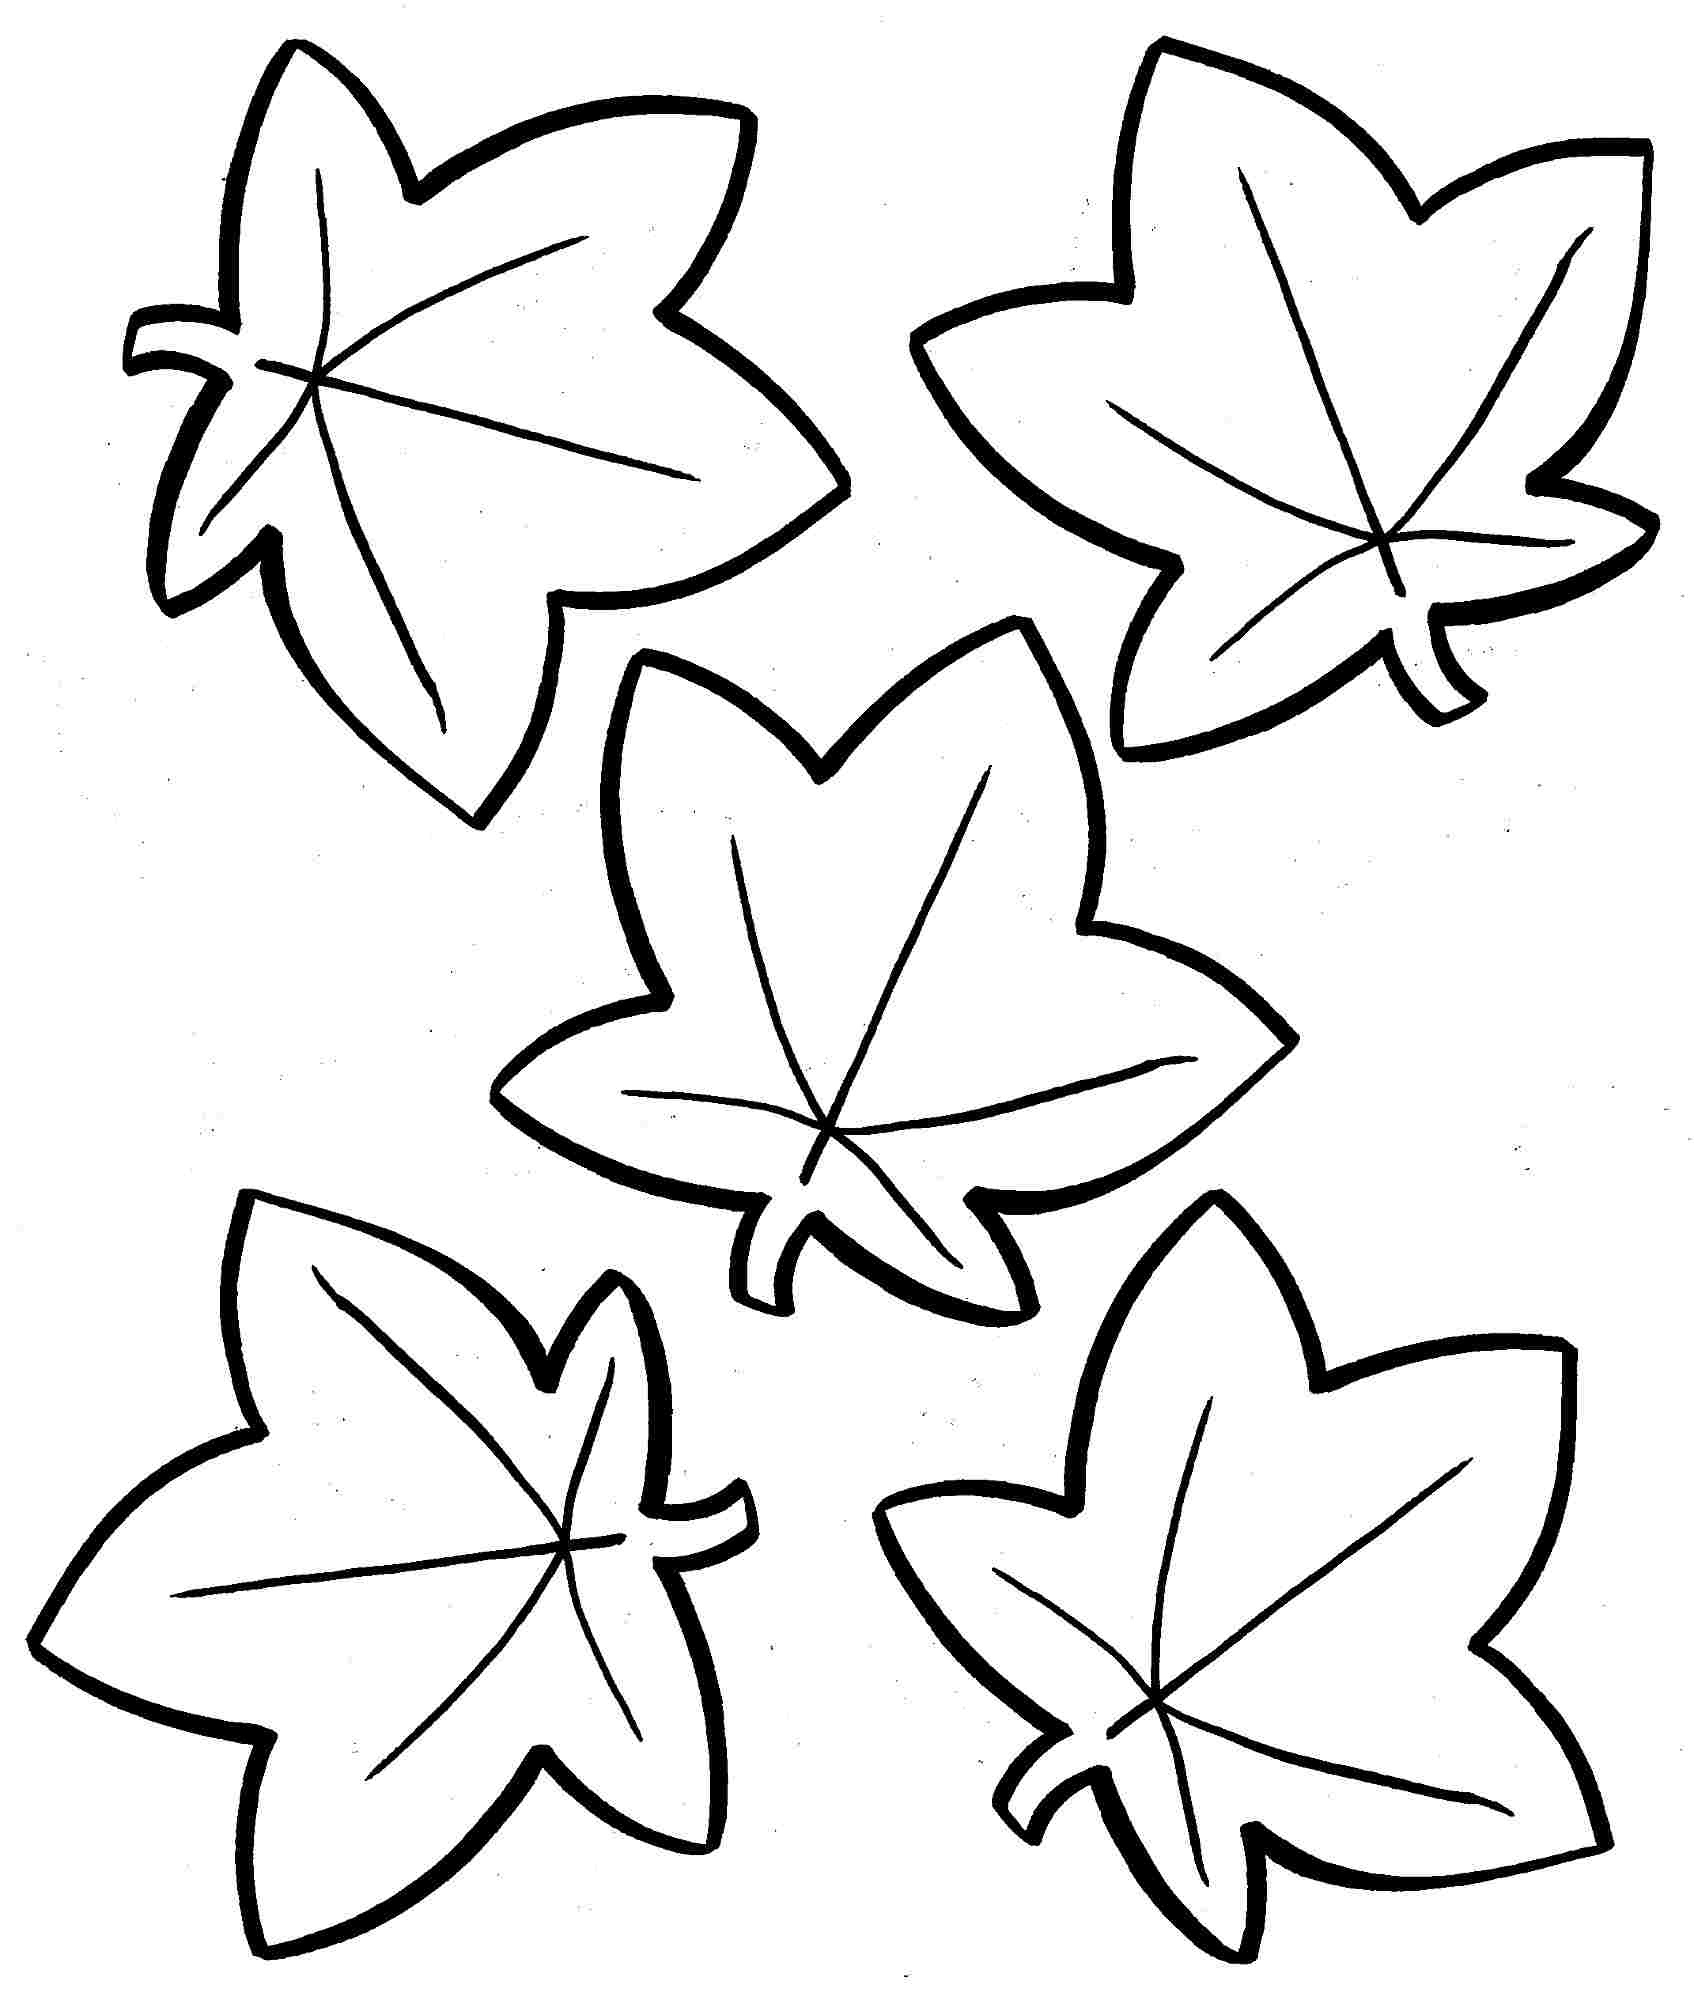 fall coloring pages free